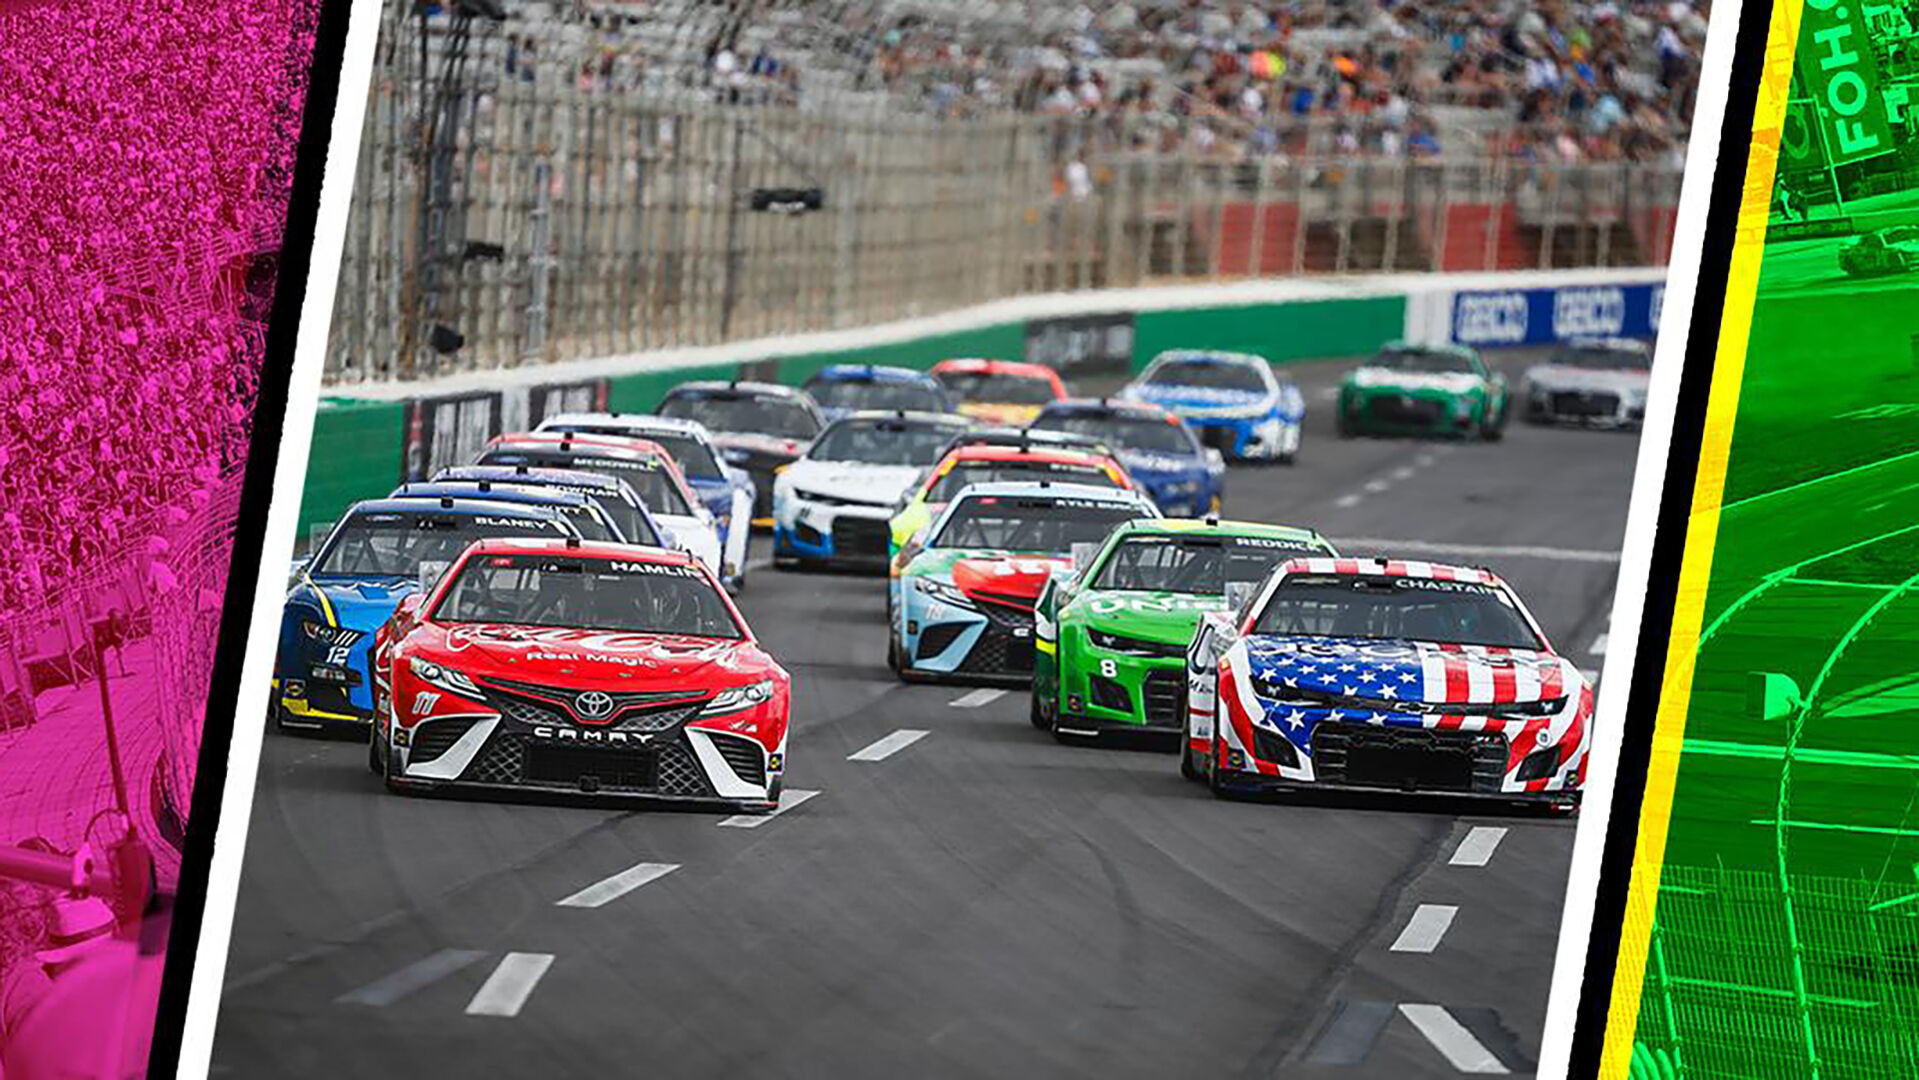 NASCAR sets dates for two 2023 races at Atlanta Motor Speedway Local News local3news